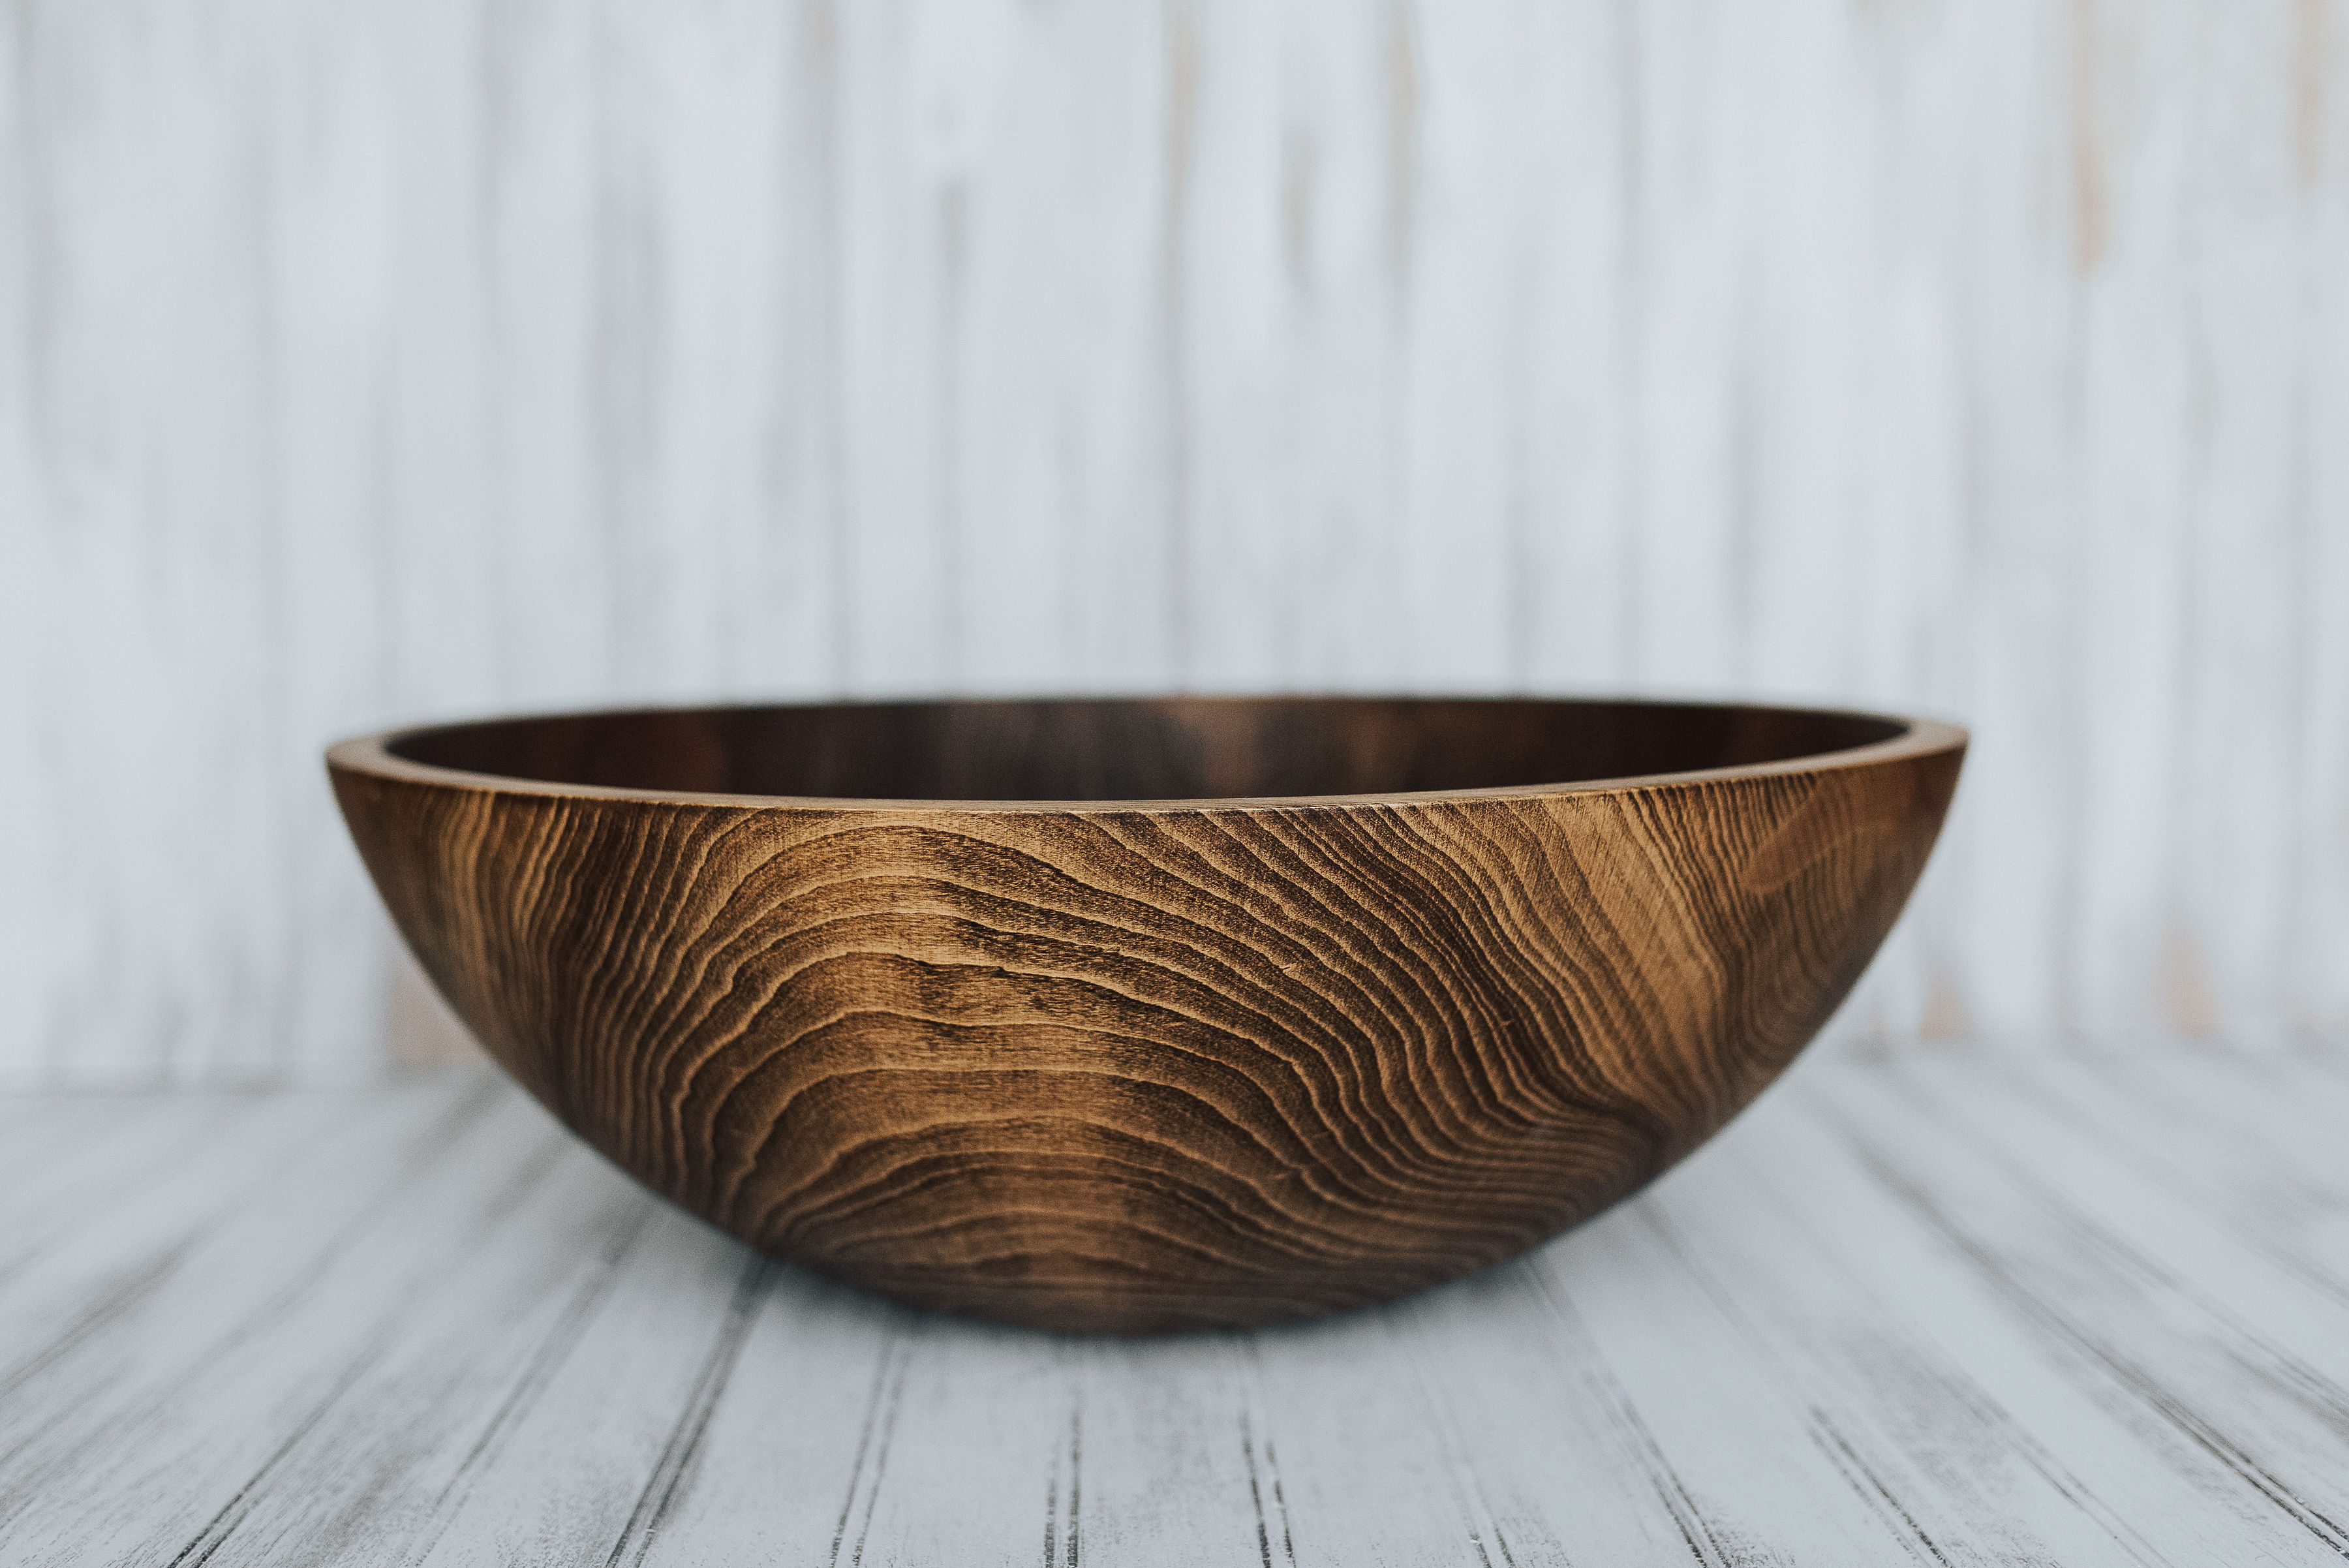 20 Inch Beech Large Wooden Bowl With Dark Walnut Finish